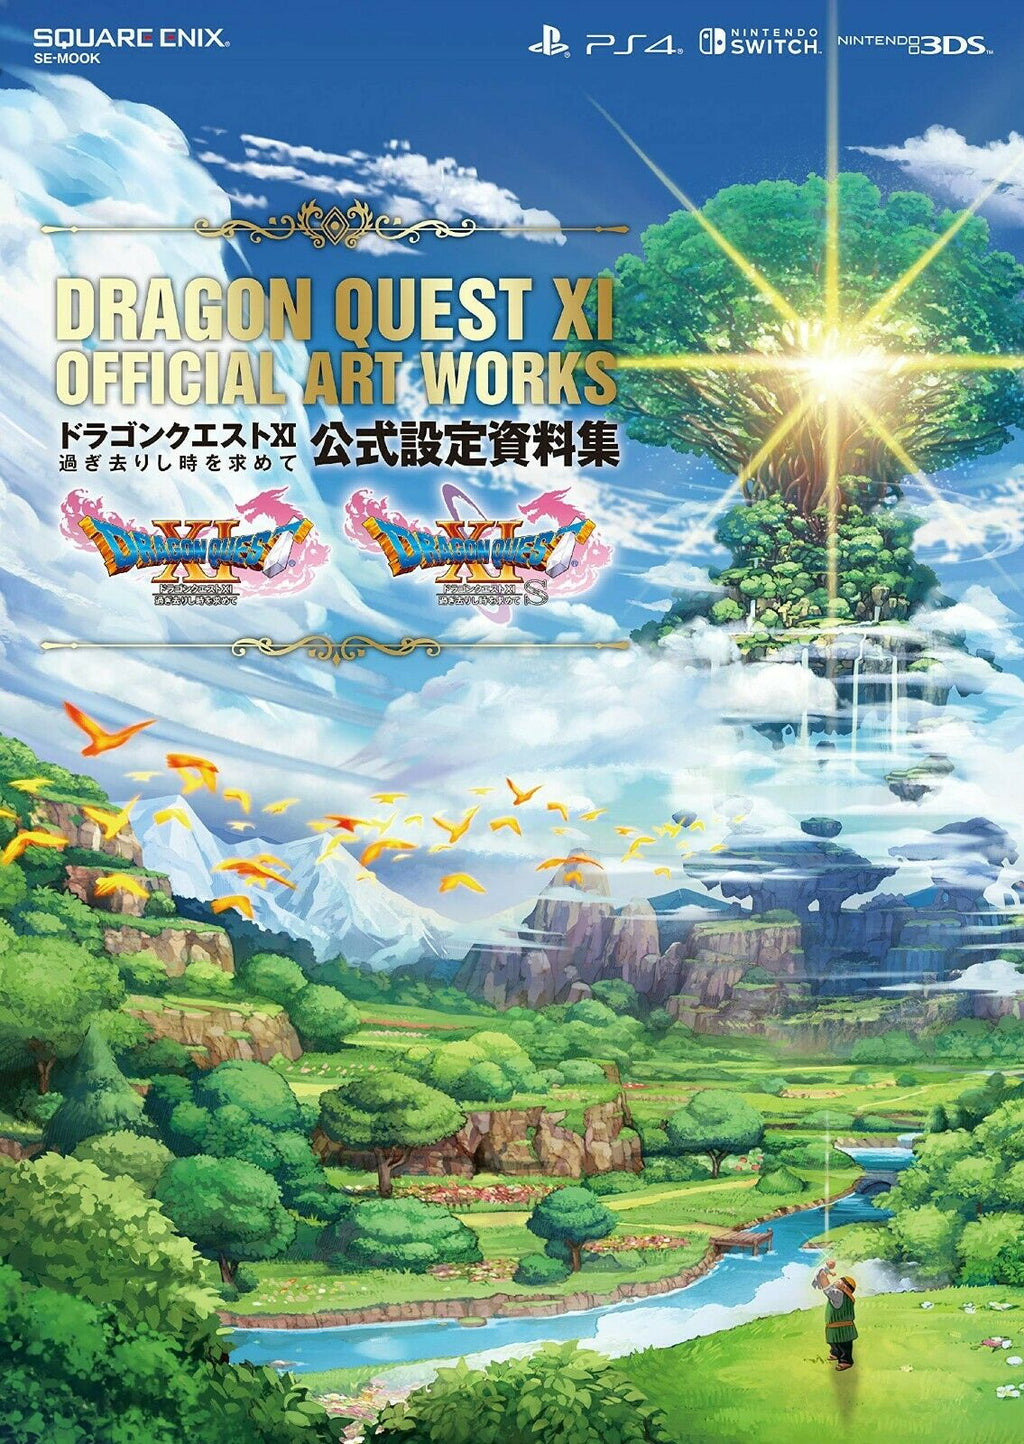 NEW' Dragon Quest XI 11 OFFICIAL ART WORKS | JAPAN Game Art Book